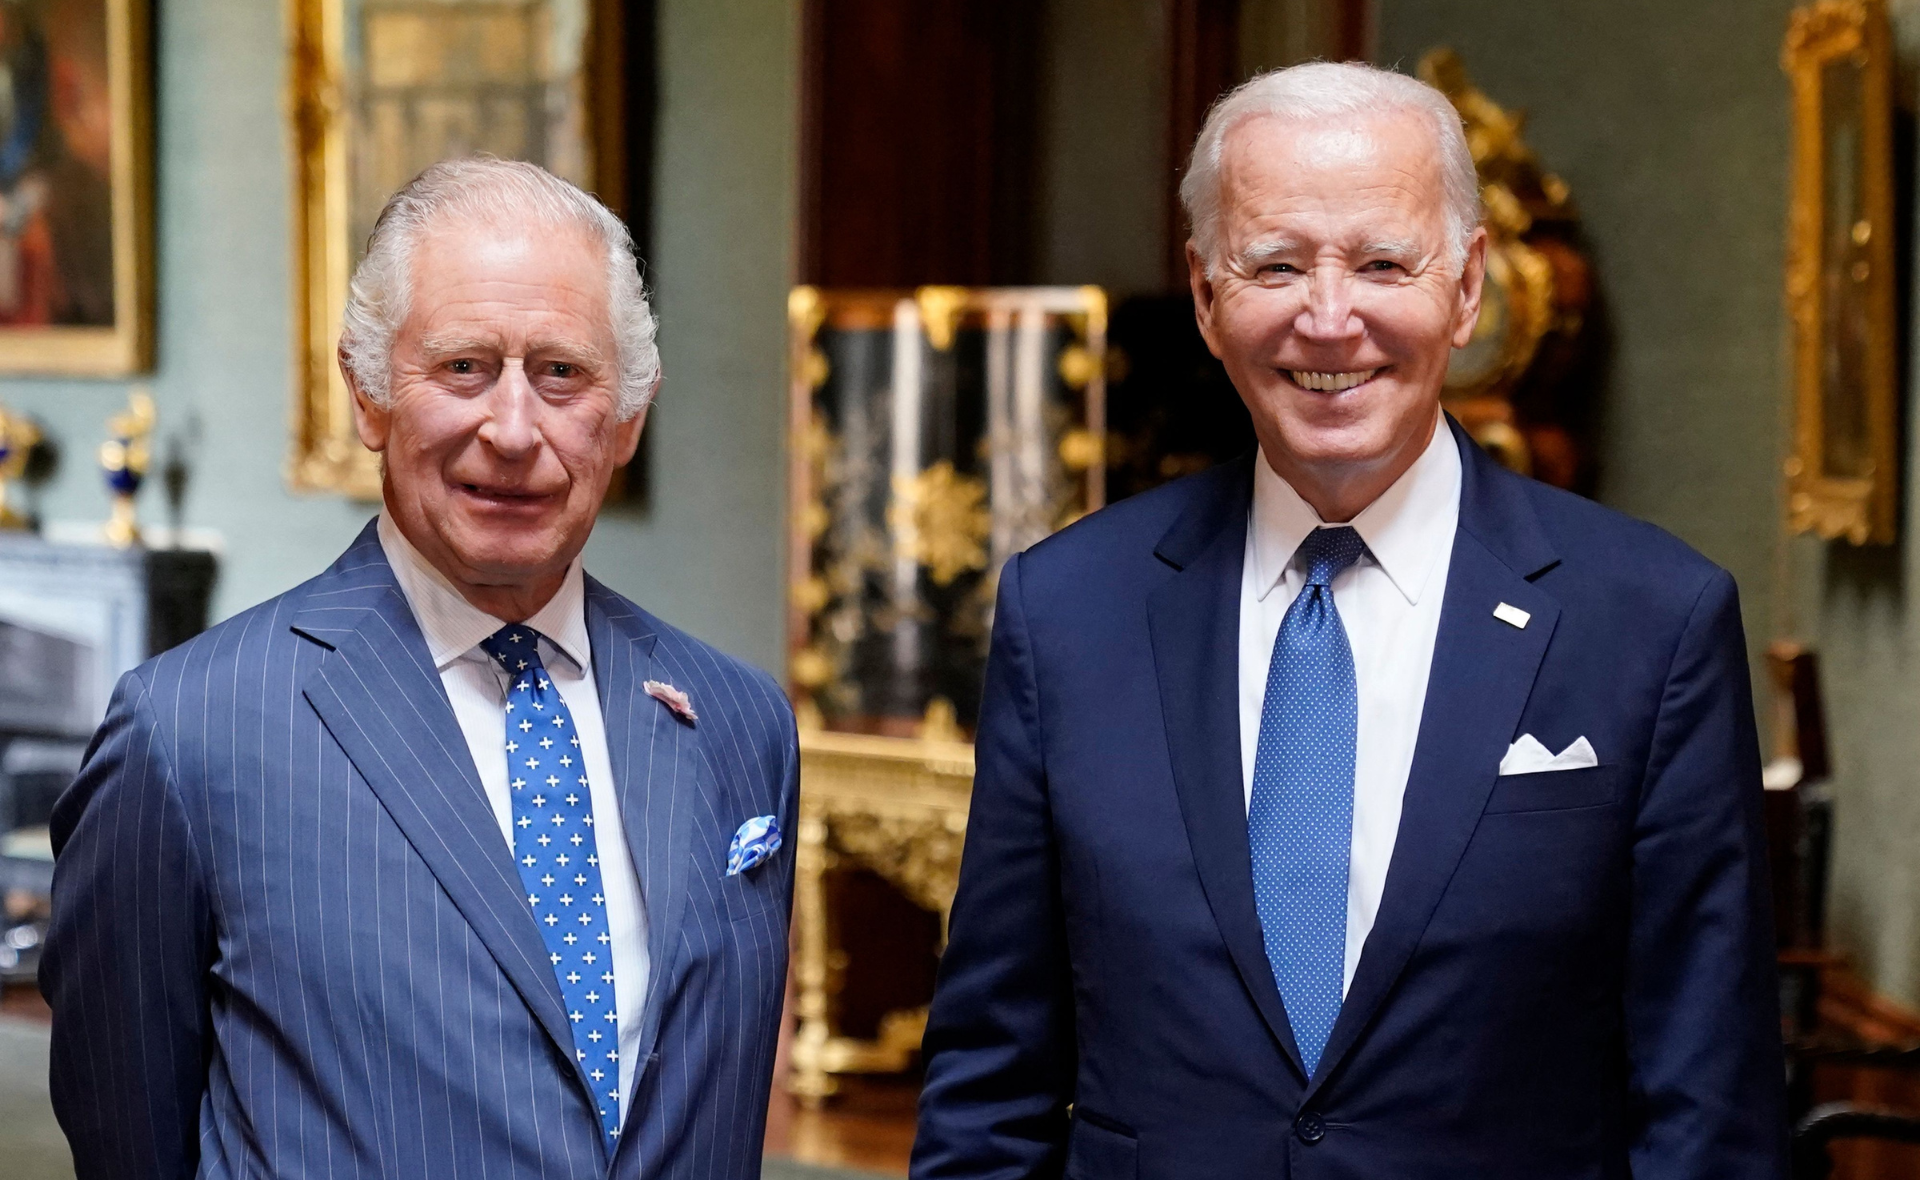 King Charles welcomes U.S. President Joe Biden for the first time as monarch